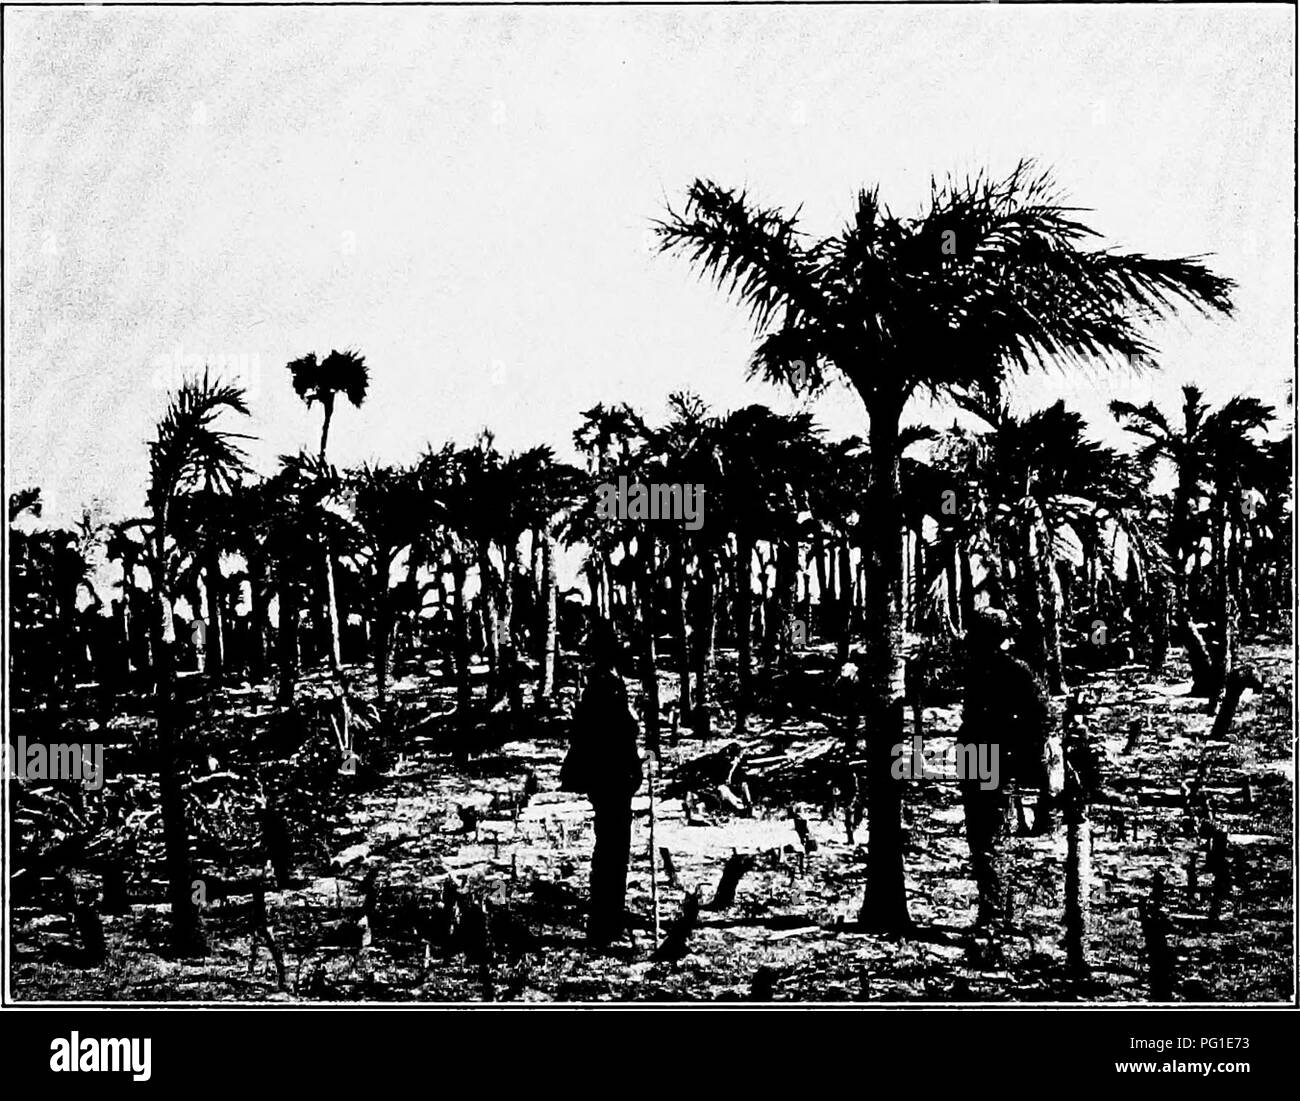 . North American trees : being descriptions and illustrations of the trees growing independently of cultivation in North America, north of Mexico and the West Indies . Trees. Hog Cabbage Palm 145 VIII. HOG CABBAGE PALM GENUS PSEUDOPHffiNIX WENDLAND Species Pseudophcenix Sargenti Wendland Cyclospalhe Northropi O. F. Cook HIS palm grows abundantly on many of the Bahama islands, inter- mixed with hardwood-trees and shrubs in the coppices, and also occurs on Elliott's Key and Key Largo, southern Florida. The genus Pseudophoenix (Greek, false Phoenix), is monotypic, only this one species being know Stock Photo